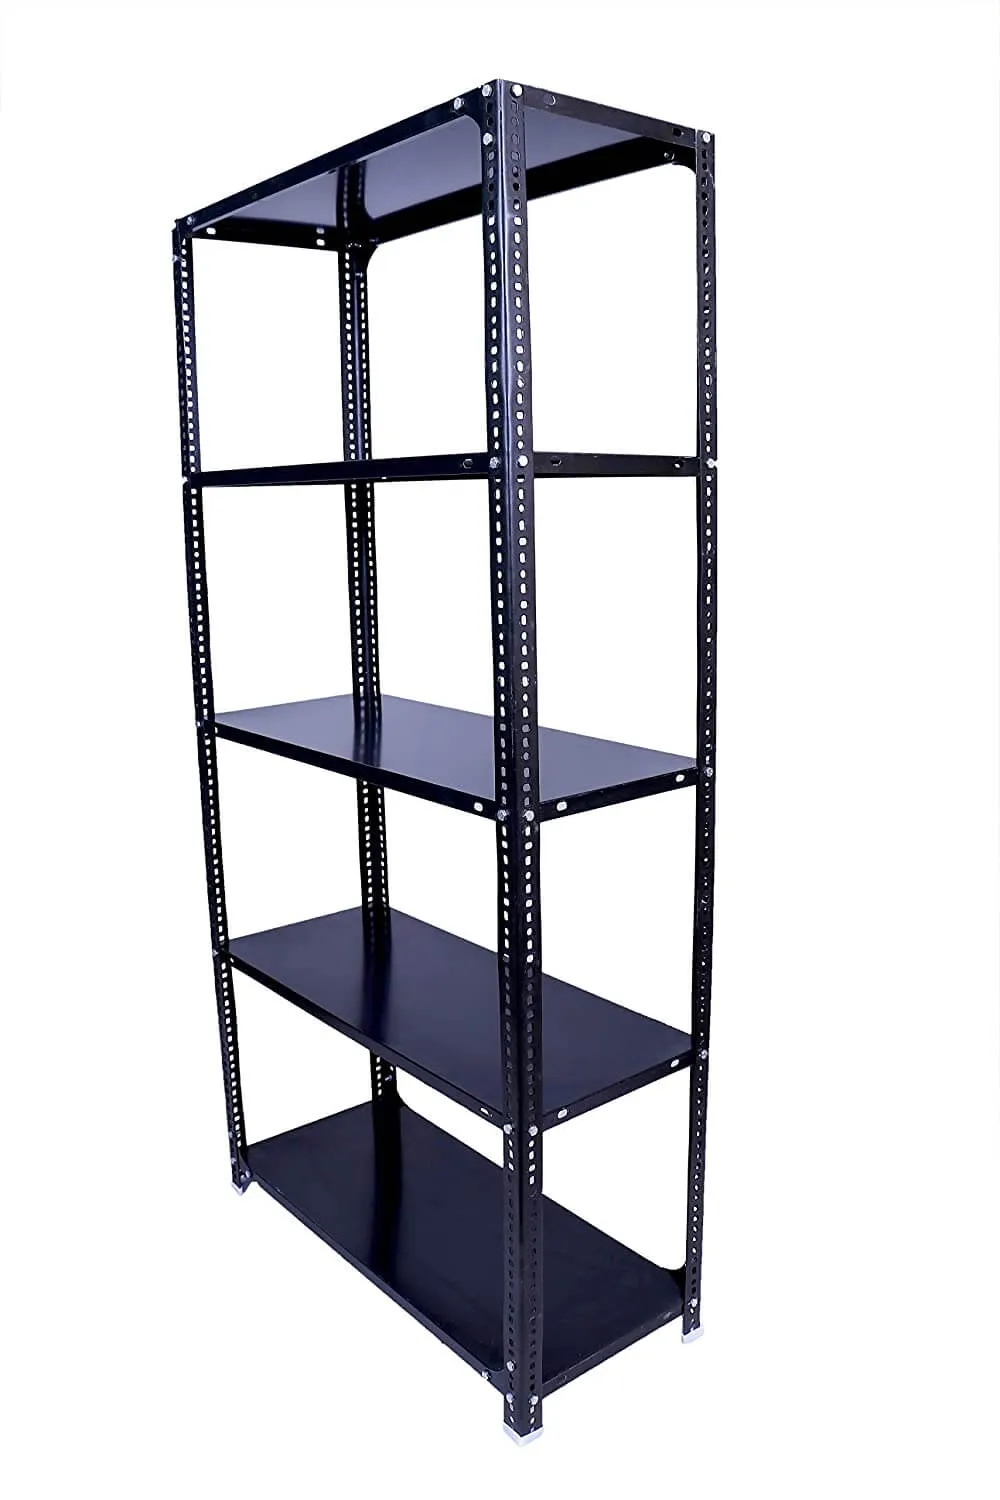 Slotted Angle Racks In Coimbatore